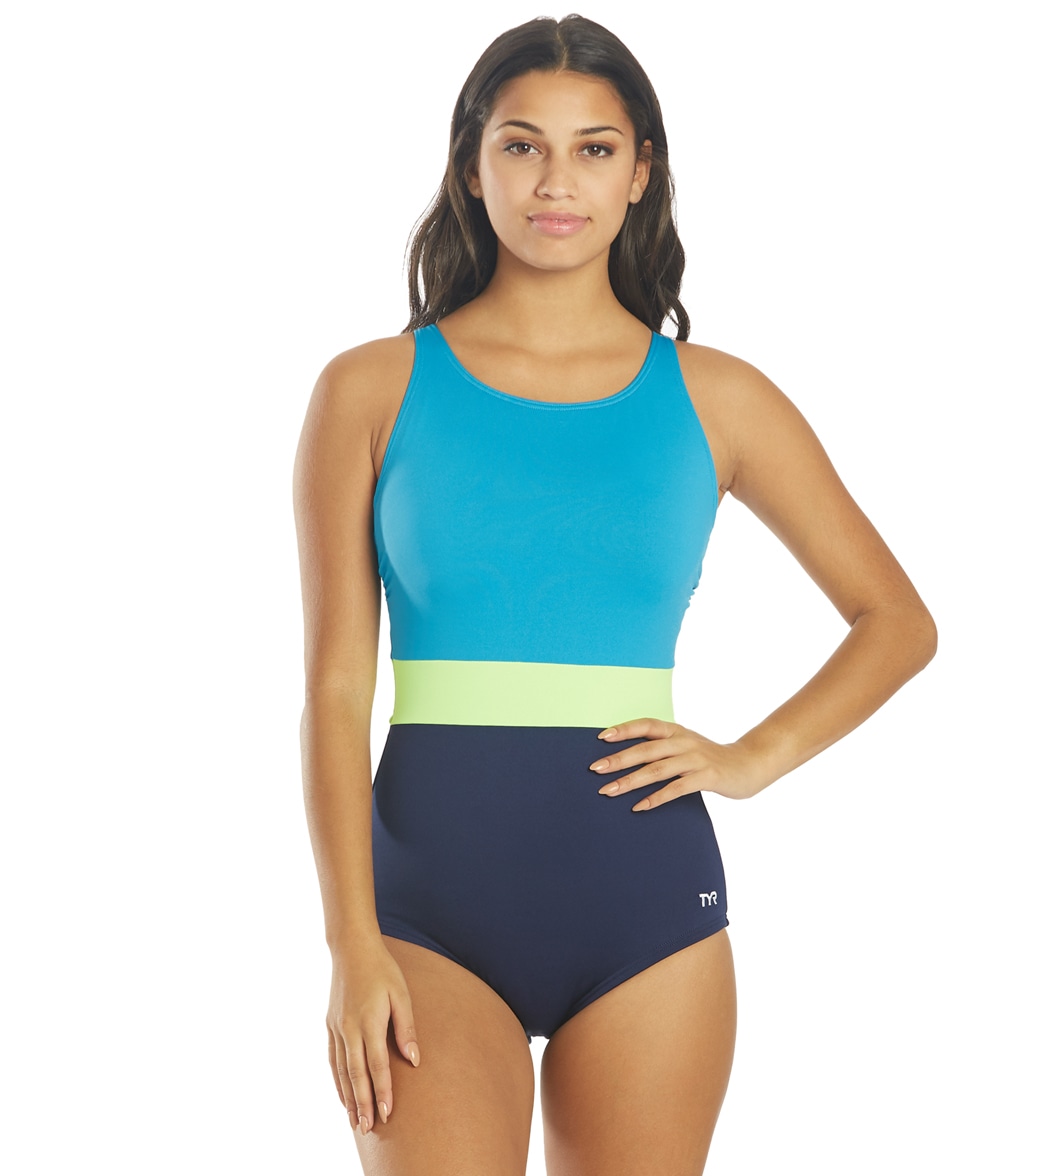 TYR Women's Solid Splice Belted Controlfit Chlorine Resistant One Piece Swimsuit - Blue/Multi 6 - Swimoutlet.com